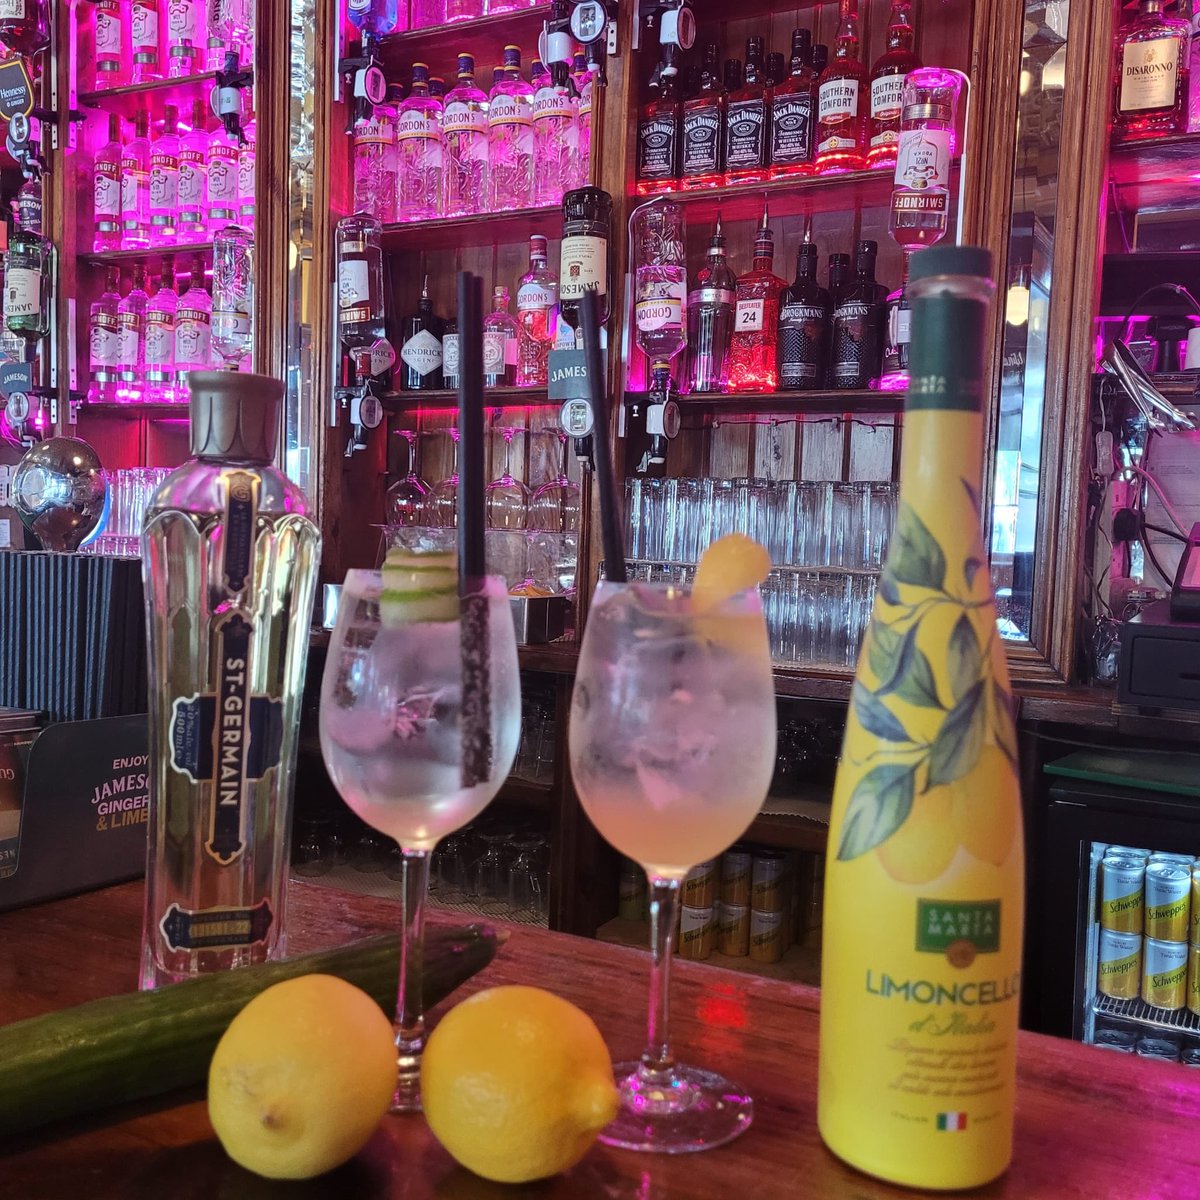 Mmmm! Check out our new spritz from today…… Limoncello Spritz !

Also serving Hugo Spritz and Aperol Spritz. All €10. 

#summerdays #summerdrinks #spritz